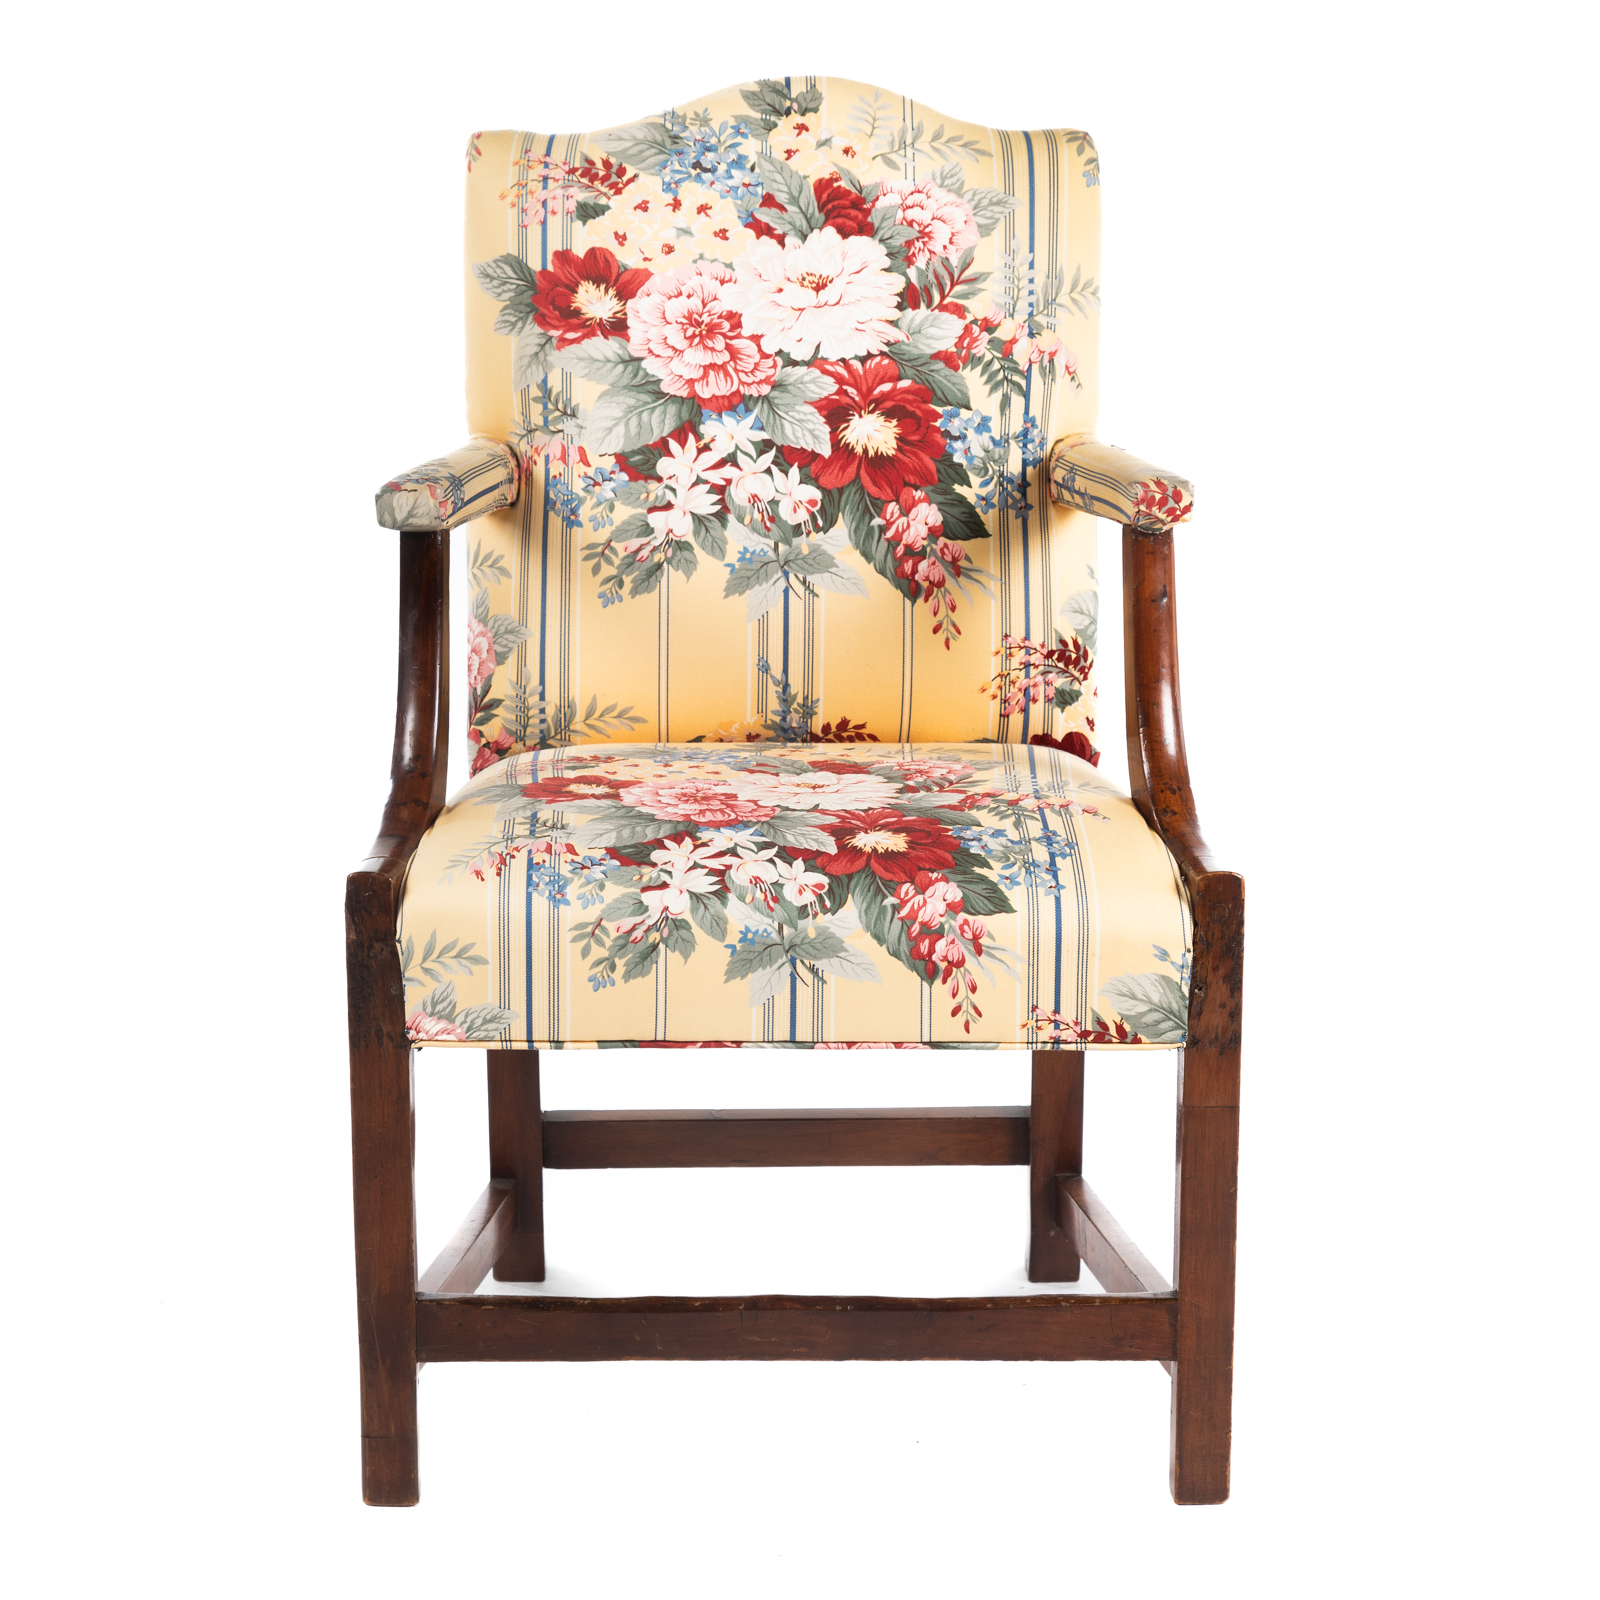 CHIPPENDALE STYLE UPHOLSTERED ARMCHAIR 369812